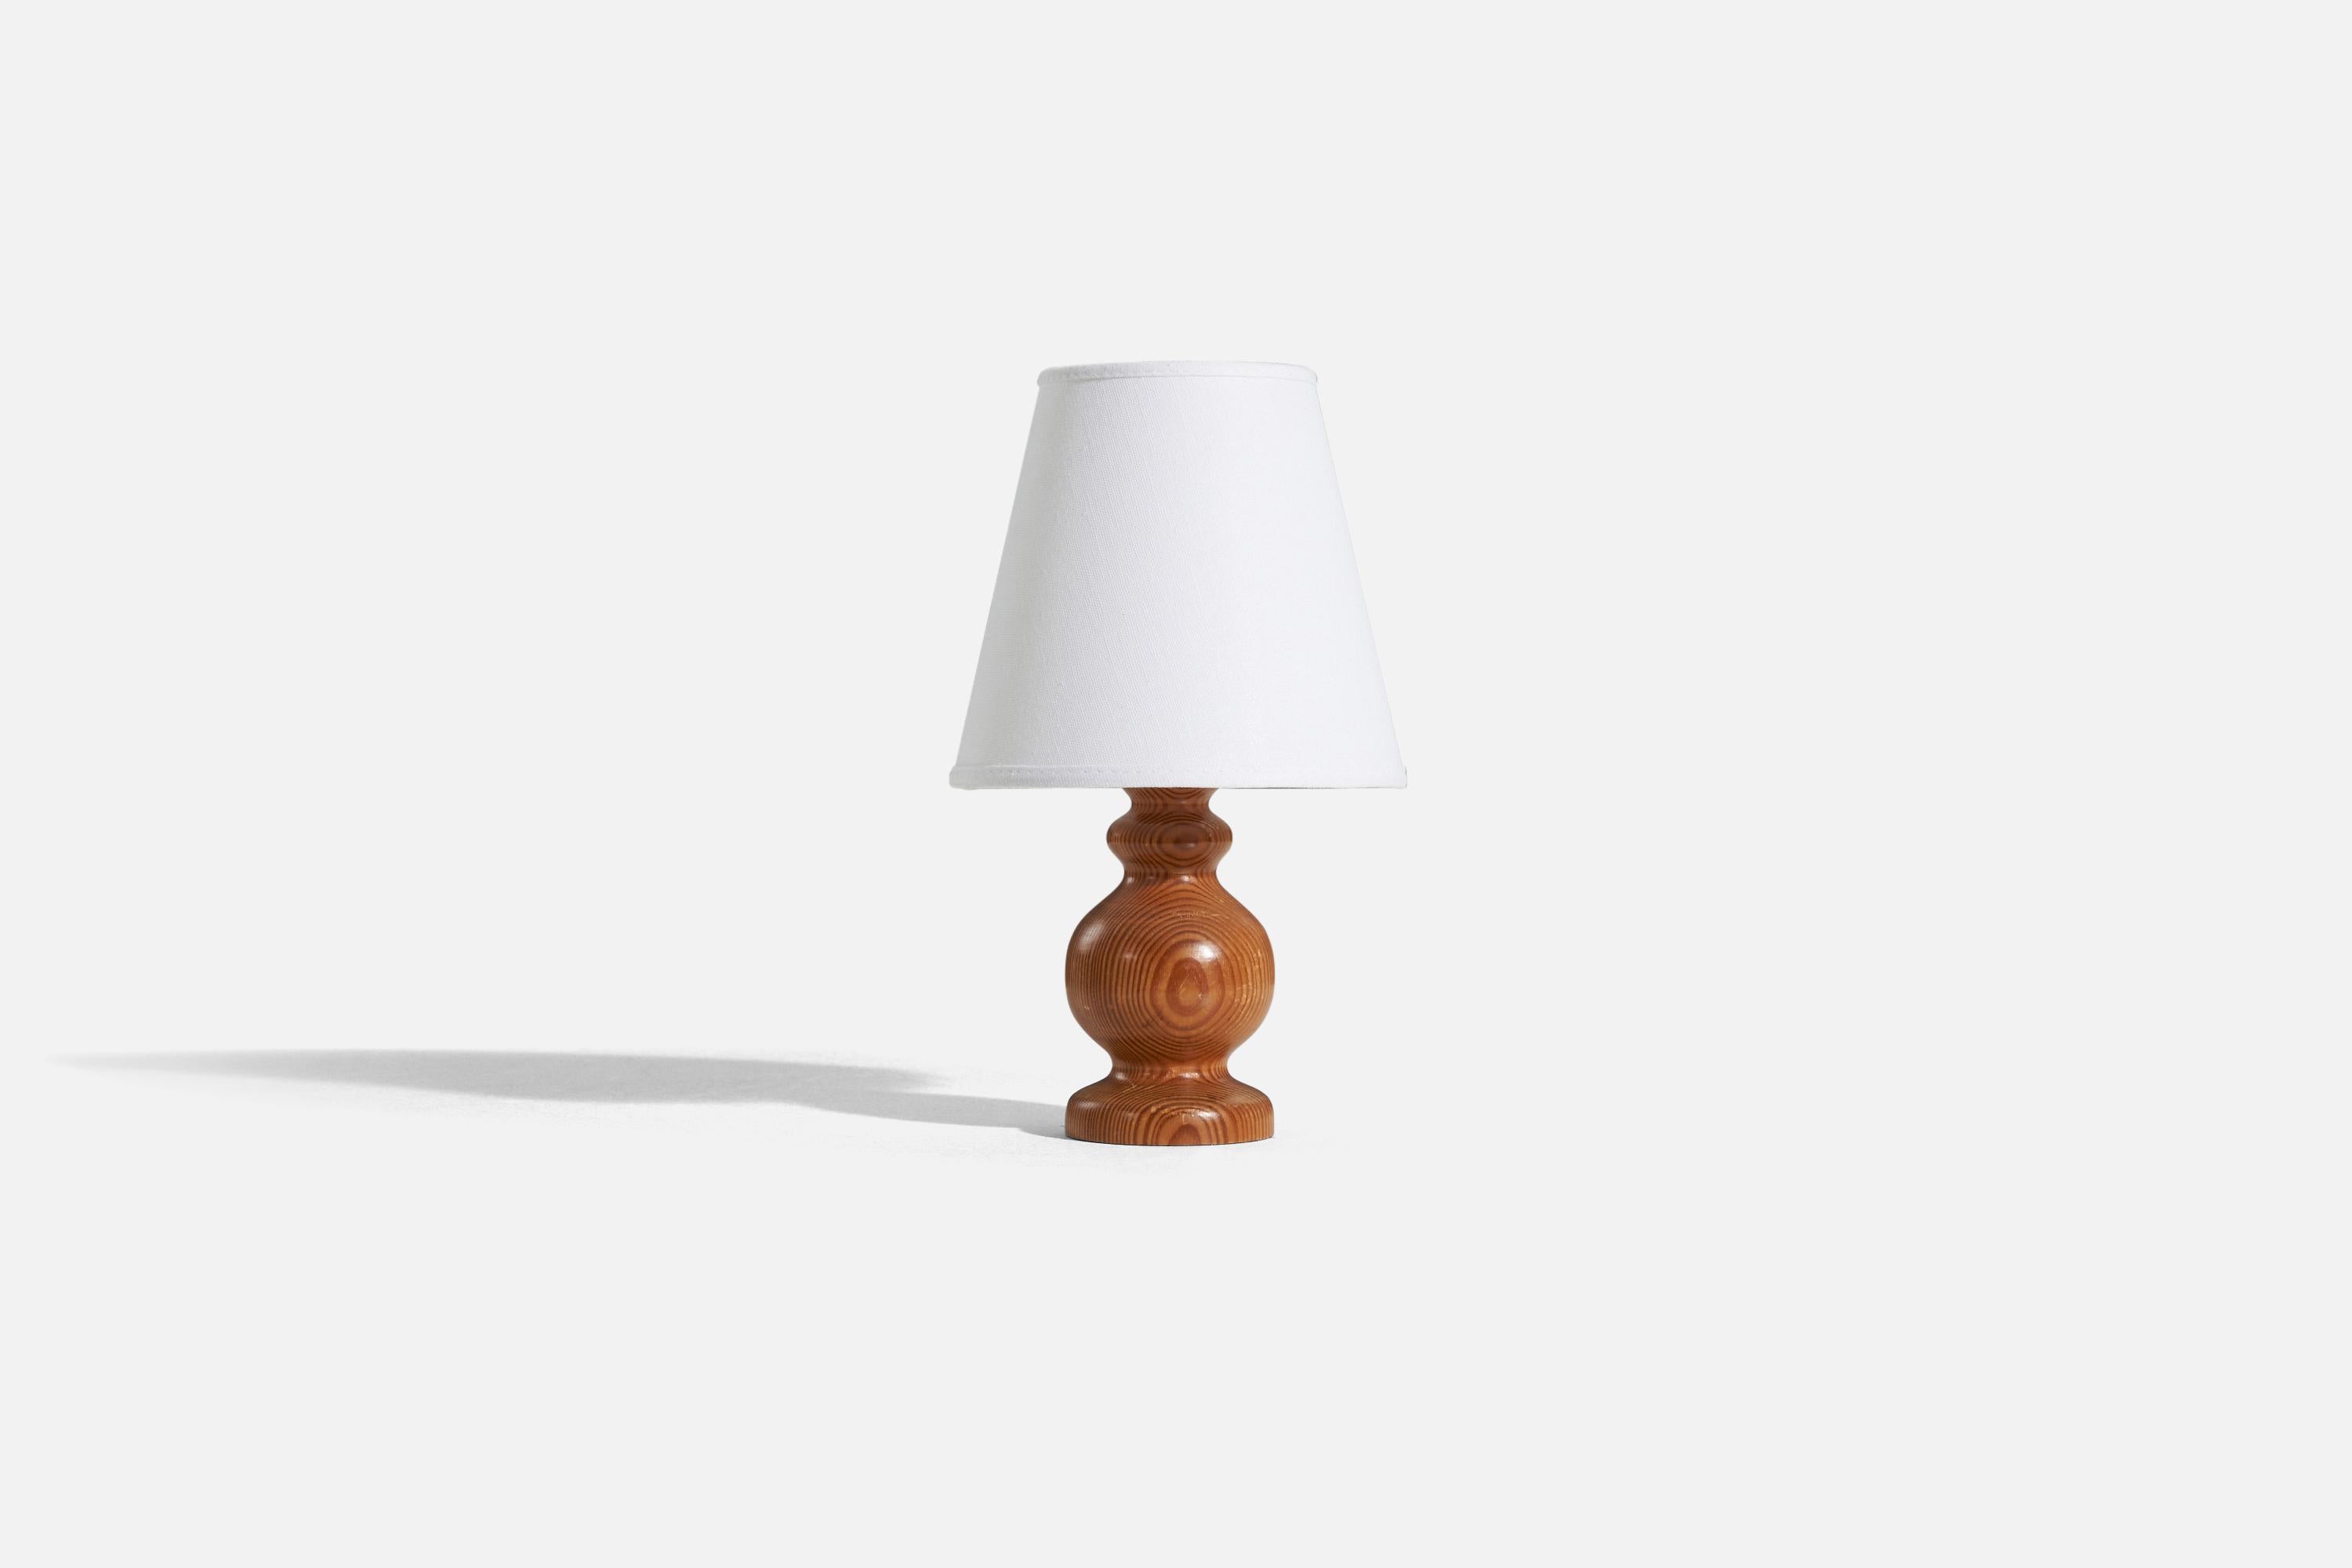 A solid pine table lamp designed and produced in Sweden, c. 1970s.

Sold without lampshade. 
Dimensions of Lamp (inches) : 8 x 3.125 x 3.125 (H x W x D)
Dimensions of Shade (inches) : 4 x 7 x 6.25 (T x B x H)
Dimension of Lamp with Shade